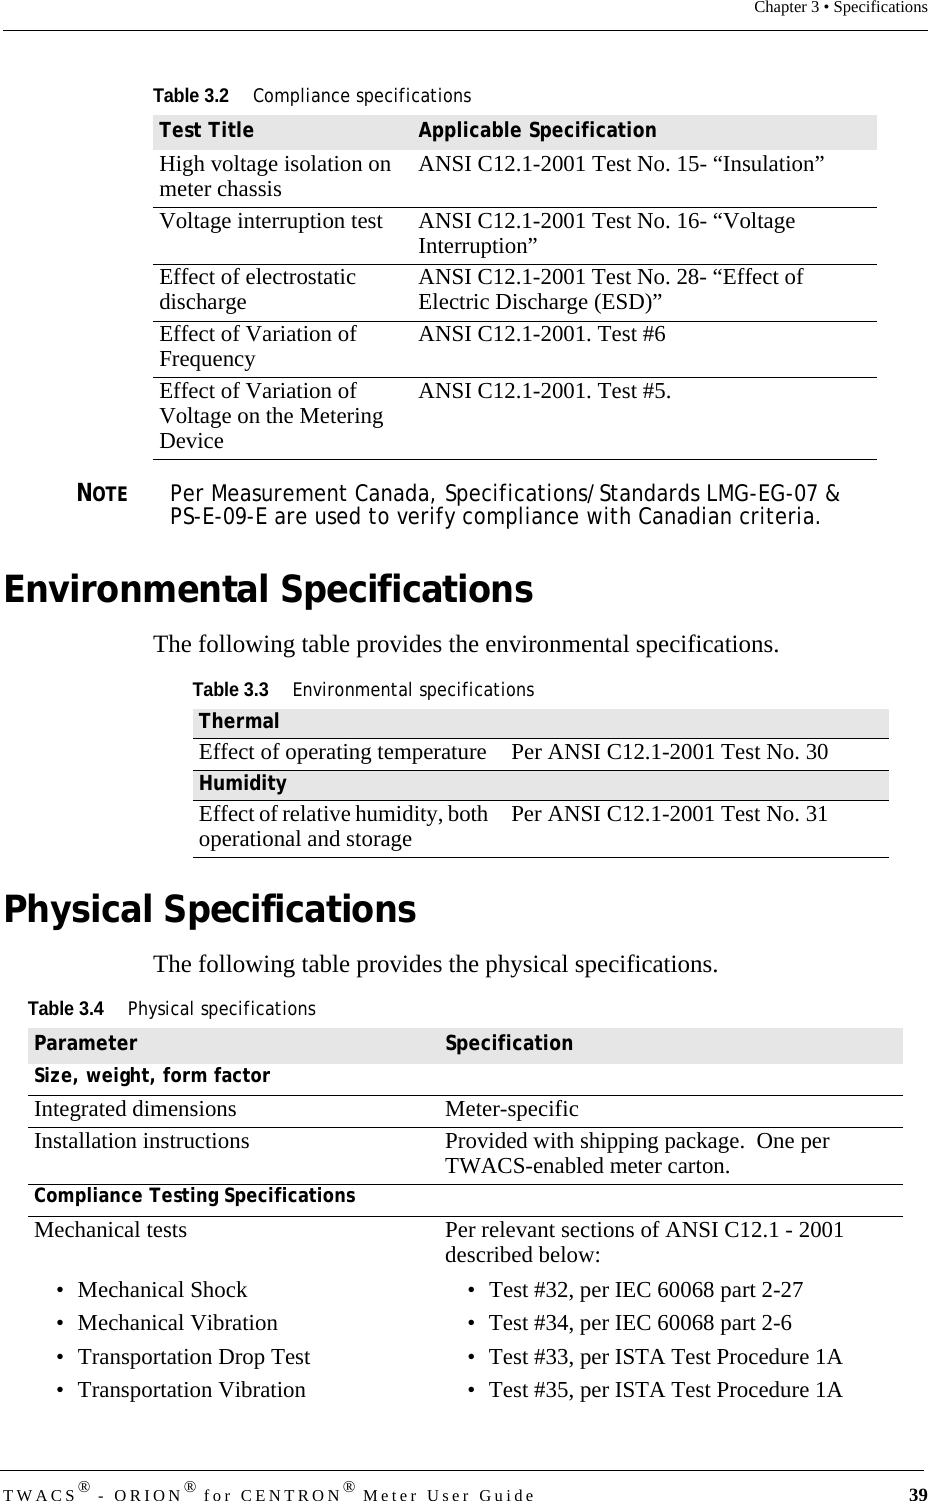 DRAFTTWACS® - ORION® for CENTRON® Meter User Guide 39Chapter 3 • SpecificationsNOTEPer Measurement Canada, Specifications/Standards LMG-EG-07 &amp; PS-E-09-E are used to verify compliance with Canadian criteria. Environmental SpecificationsThe following table provides the environmental specifications.Physical SpecificationsThe following table provides the physical specifications.High voltage isolation on meter chassis ANSI C12.1-2001 Test No. 15- “Insulation”Voltage interruption test ANSI C12.1-2001 Test No. 16- “Voltage Interruption”Effect of electrostatic discharge ANSI C12.1-2001 Test No. 28- “Effect of Electric Discharge (ESD)”Effect of Variation of Frequency ANSI C12.1-2001. Test #6Effect of Variation of Voltage on the Metering DeviceANSI C12.1-2001. Test #5.Table 3.2Compliance specificationsTest Title Applicable SpecificationTable 3.3Environmental specificationsThermalEffect of operating temperature  Per ANSI C12.1-2001 Test No. 30HumidityEffect of relative humidity, both operational and storage Per ANSI C12.1-2001 Test No. 31Table 3.4Physical specificationsParameter SpecificationSize, weight, form factorIntegrated dimensions Meter-specificInstallation instructions Provided with shipping package.  One per TWACS-enabled meter carton.Compliance Testing SpecificationsMechanical tests• Mechanical Shock• Mechanical Vibration• Transportation Drop Test• Transportation VibrationPer relevant sections of ANSI C12.1 - 2001 described below:• Test #32, per IEC 60068 part 2-27• Test #34, per IEC 60068 part 2-6• Test #33, per ISTA Test Procedure 1A• Test #35, per ISTA Test Procedure 1A